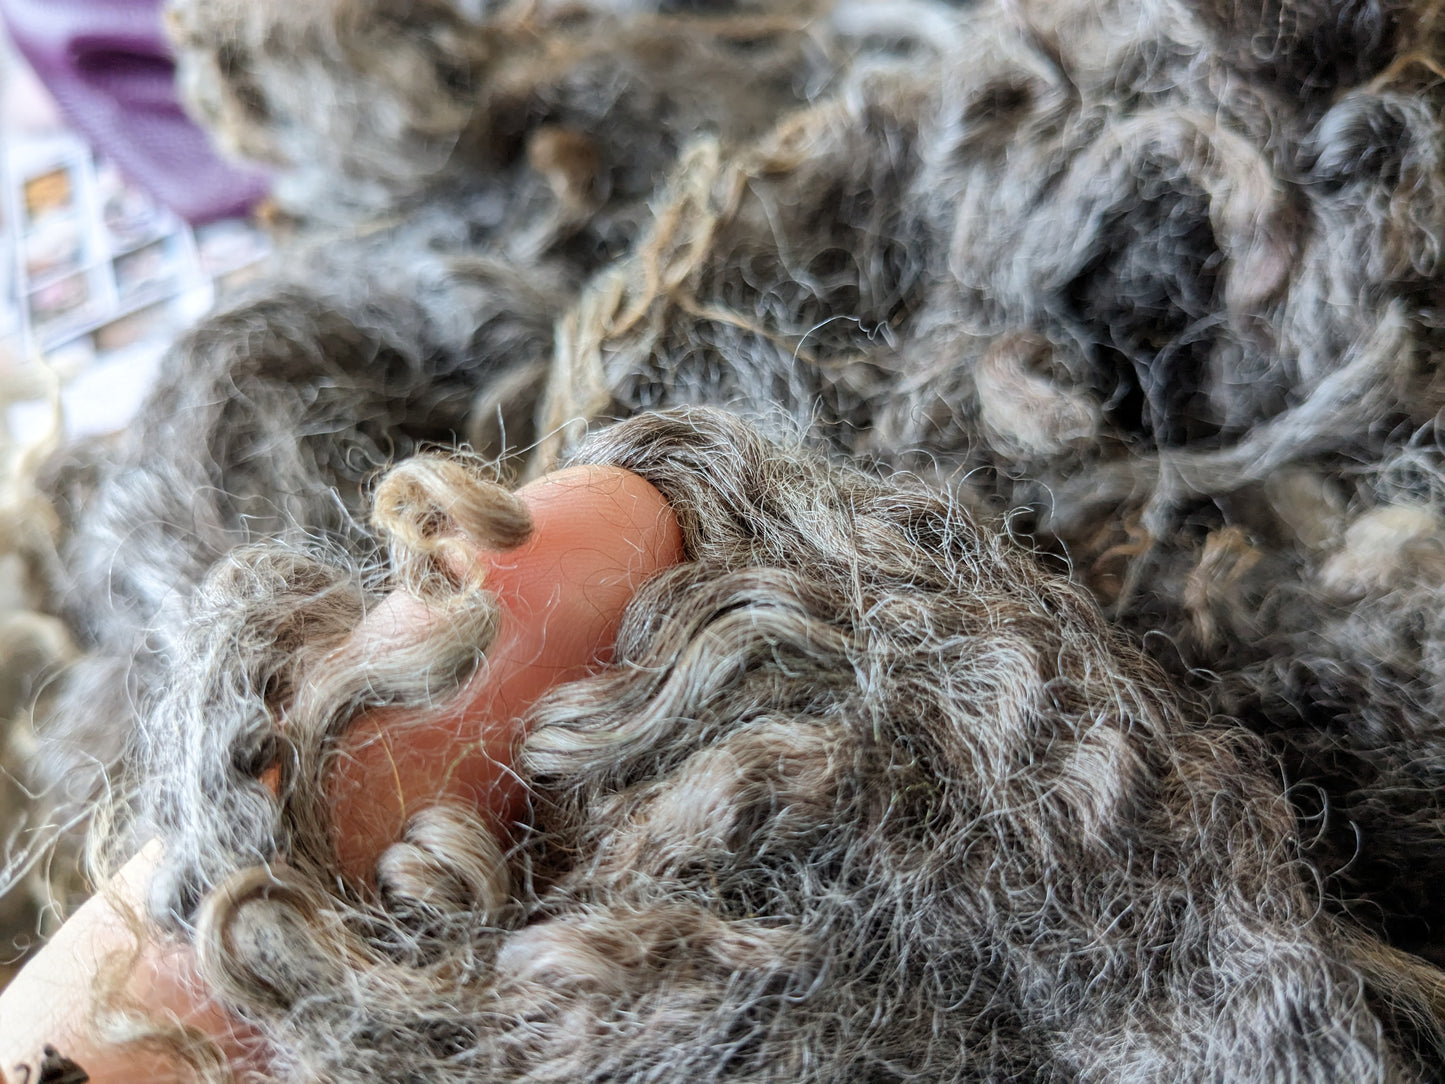 200g hand washed natural fleece, mix of textures and shades of a beautiful Gotland X fleece